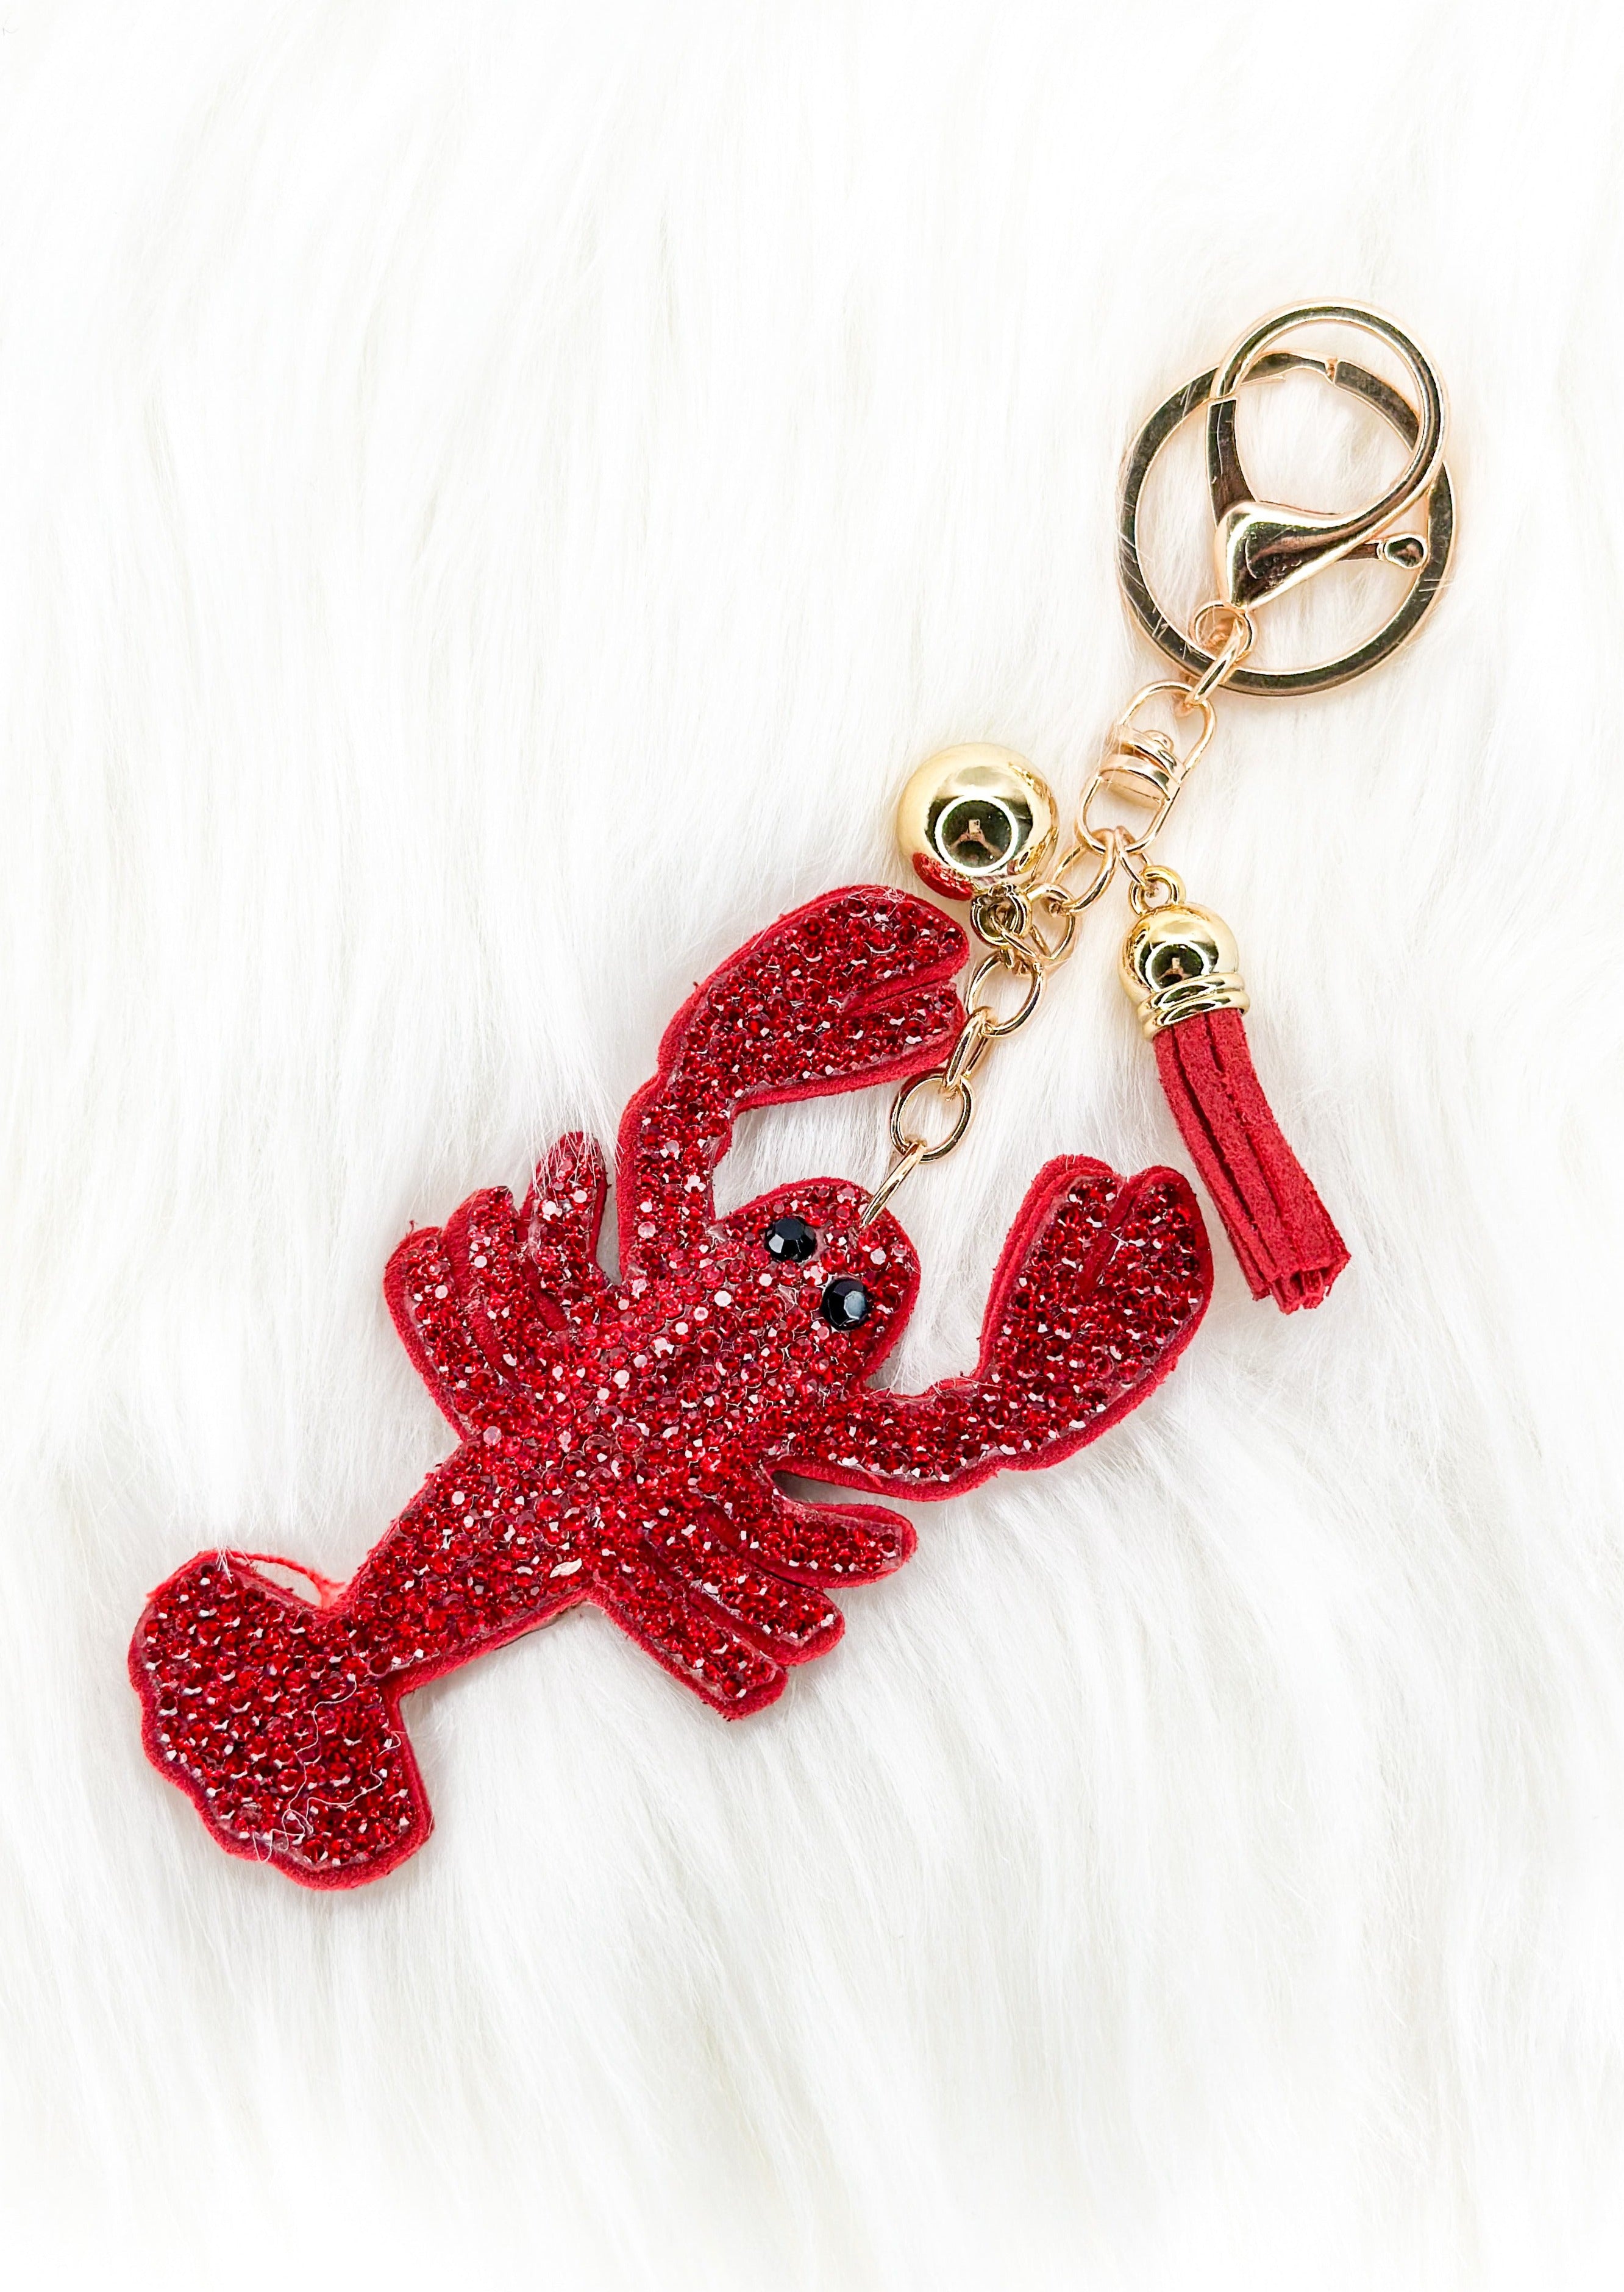 red sparkly crawfish keychain with tassel and gold hardware